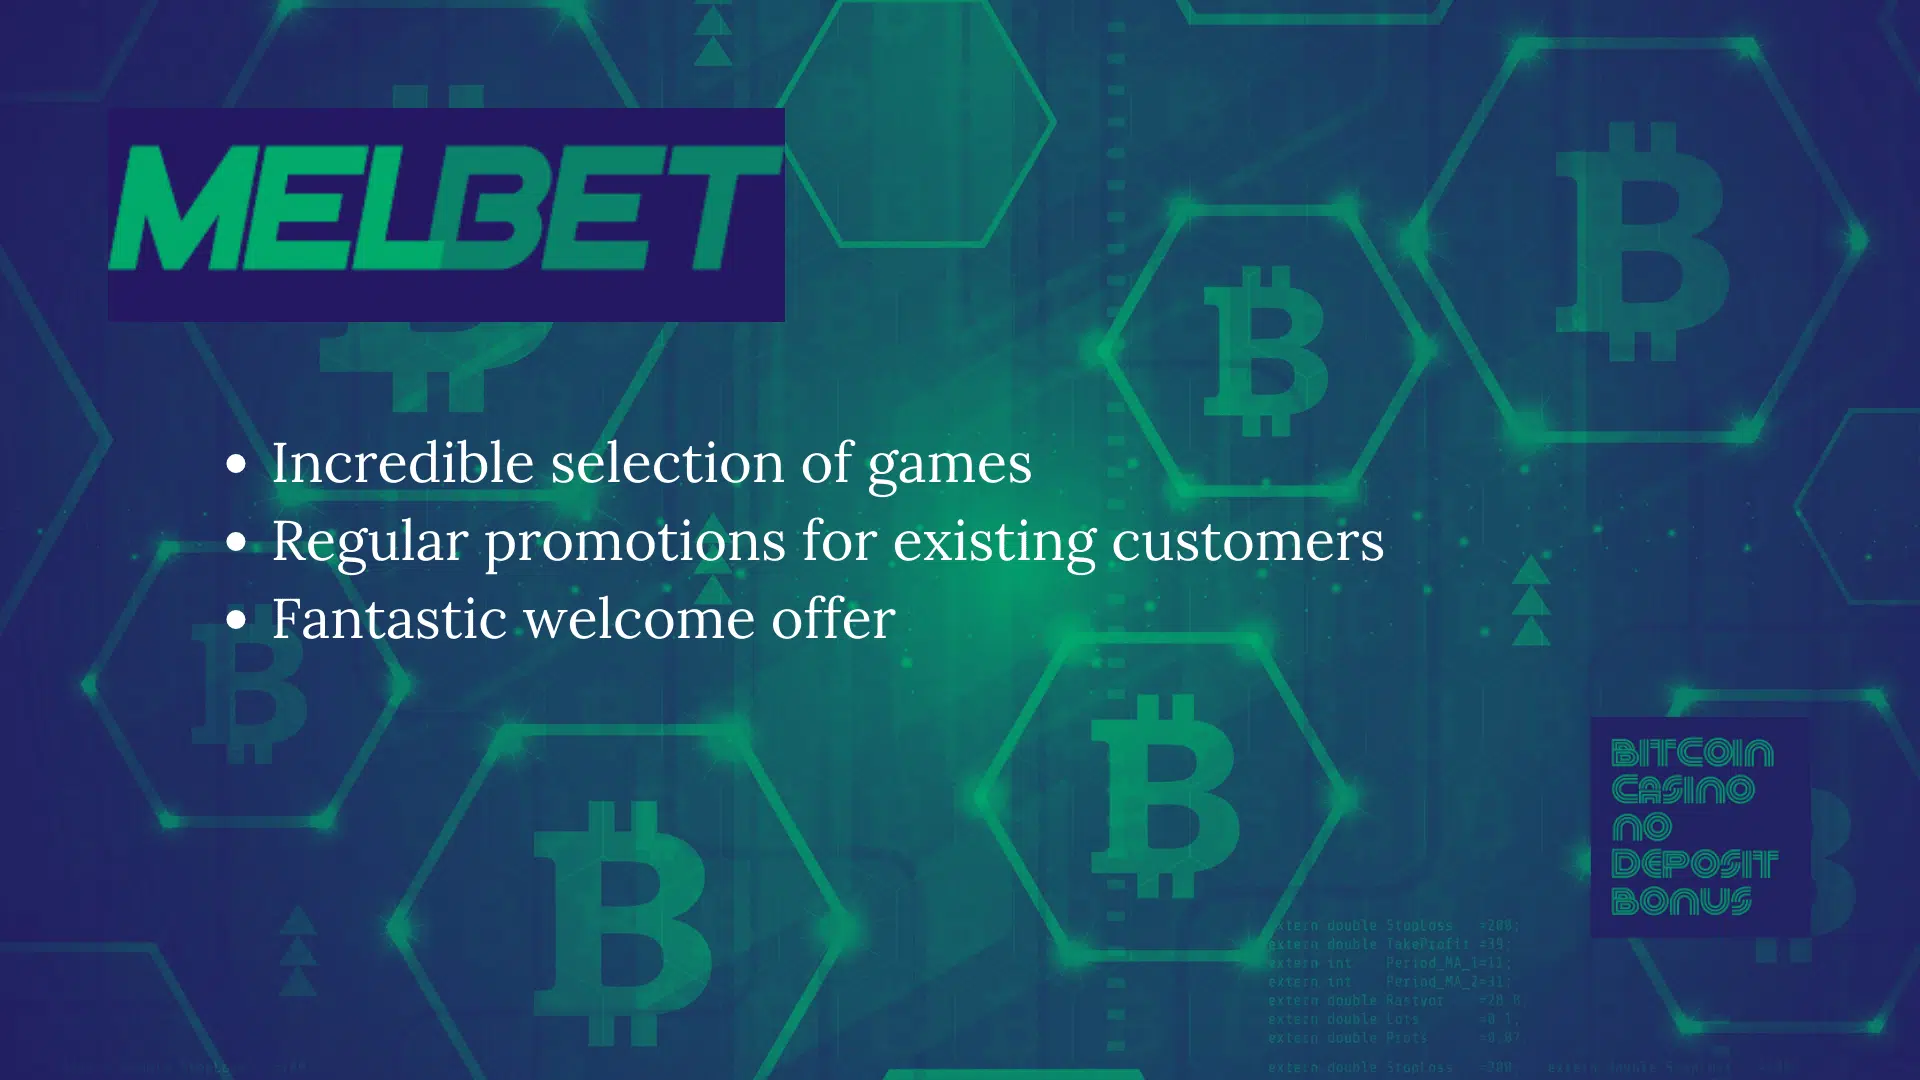 You are currently viewing Melbet Bonus Codes – Melbet.com Free Bet Coupons December 2022